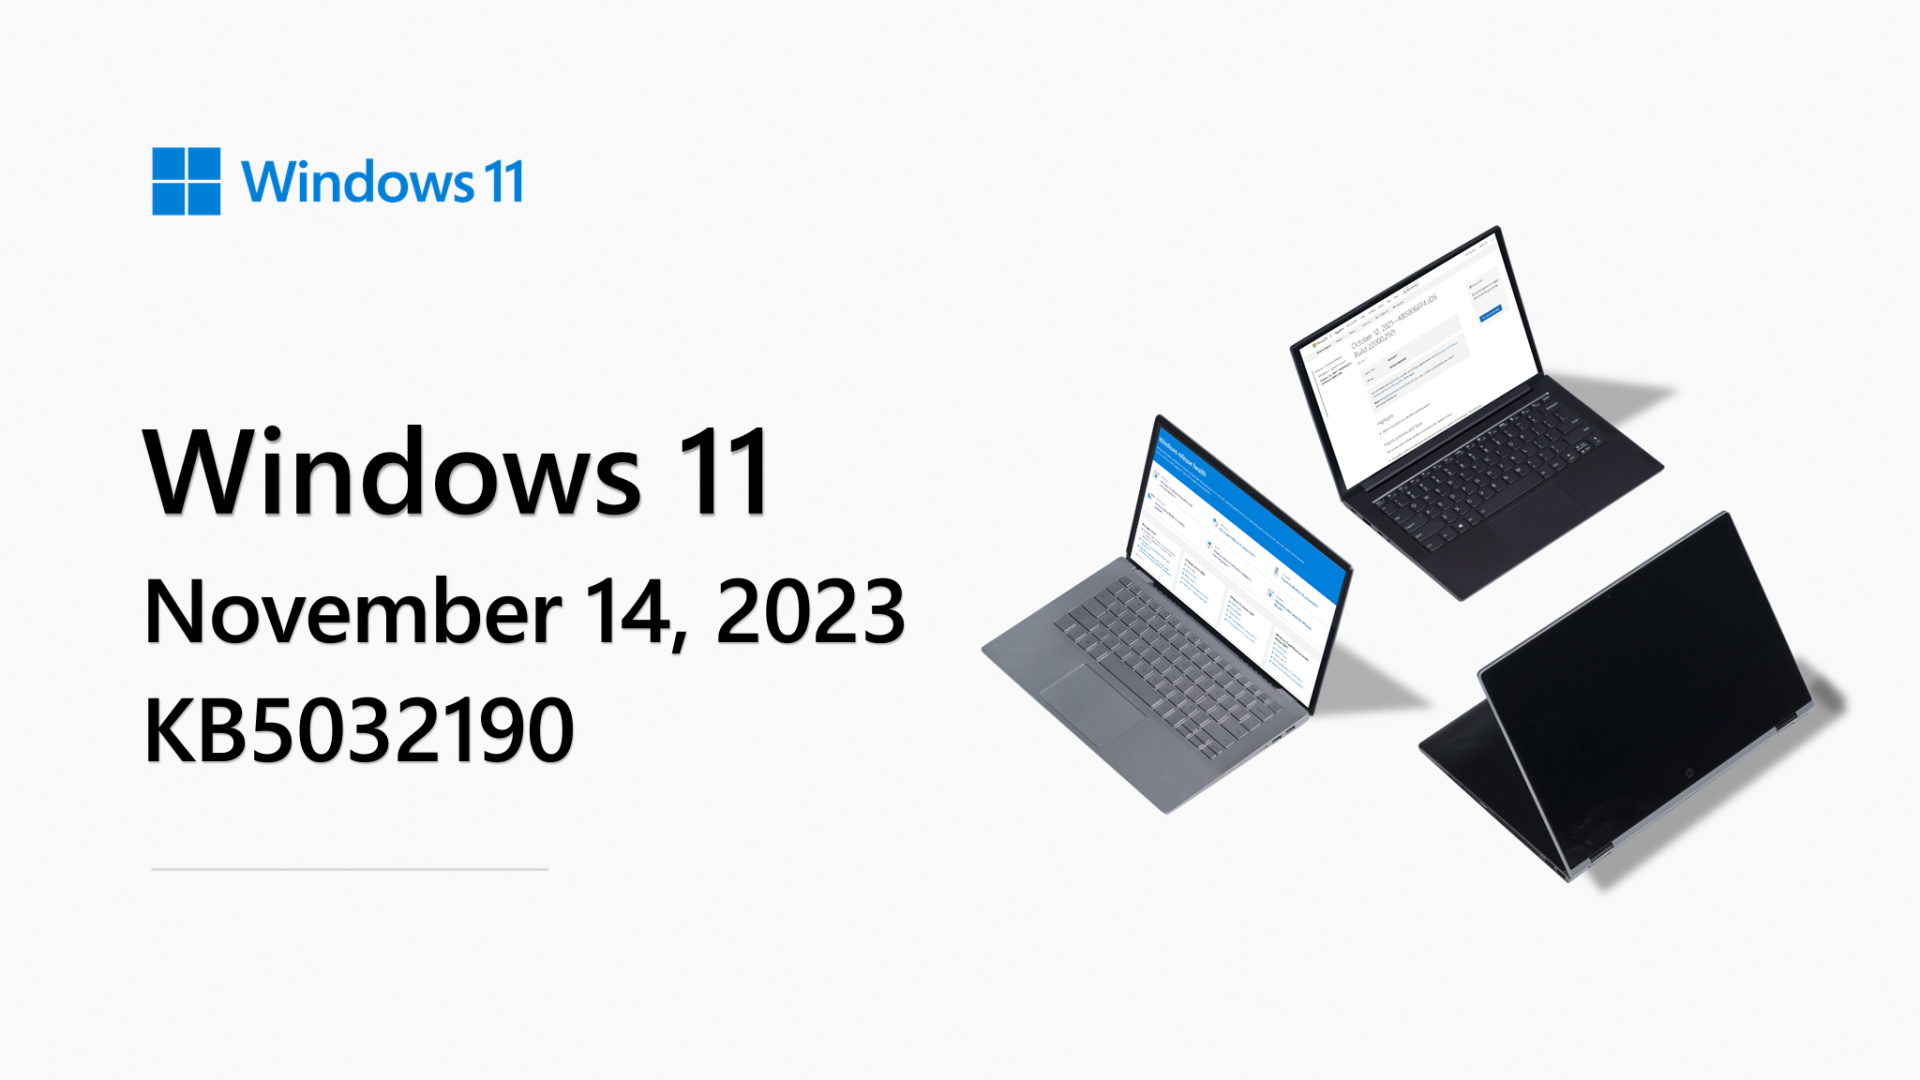 Windows 11 February 2023 Update or 'Moment 2' is now available for download  - Neowin